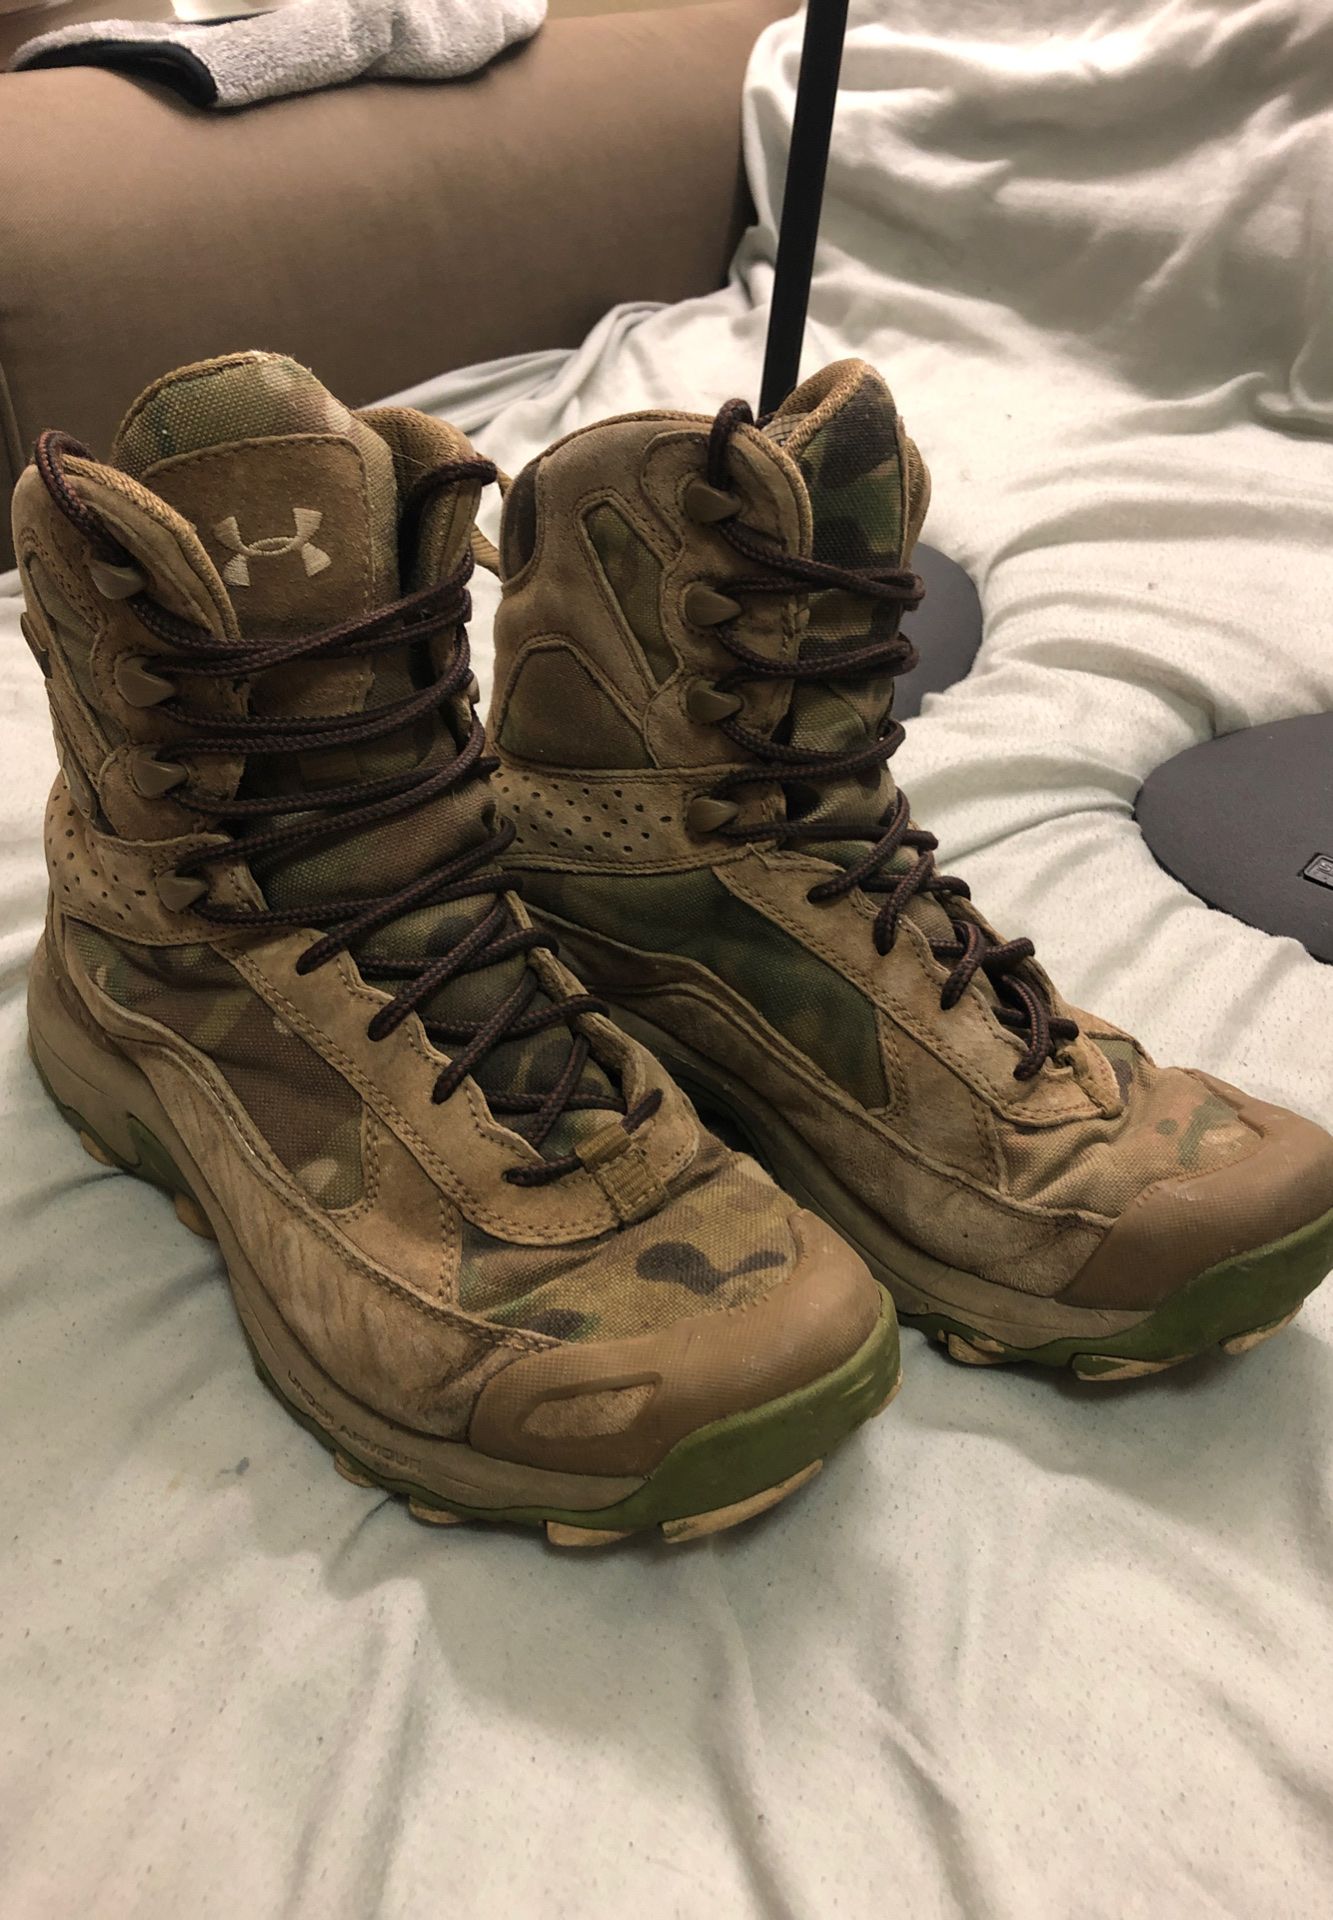 Under Armor Boots Size 9